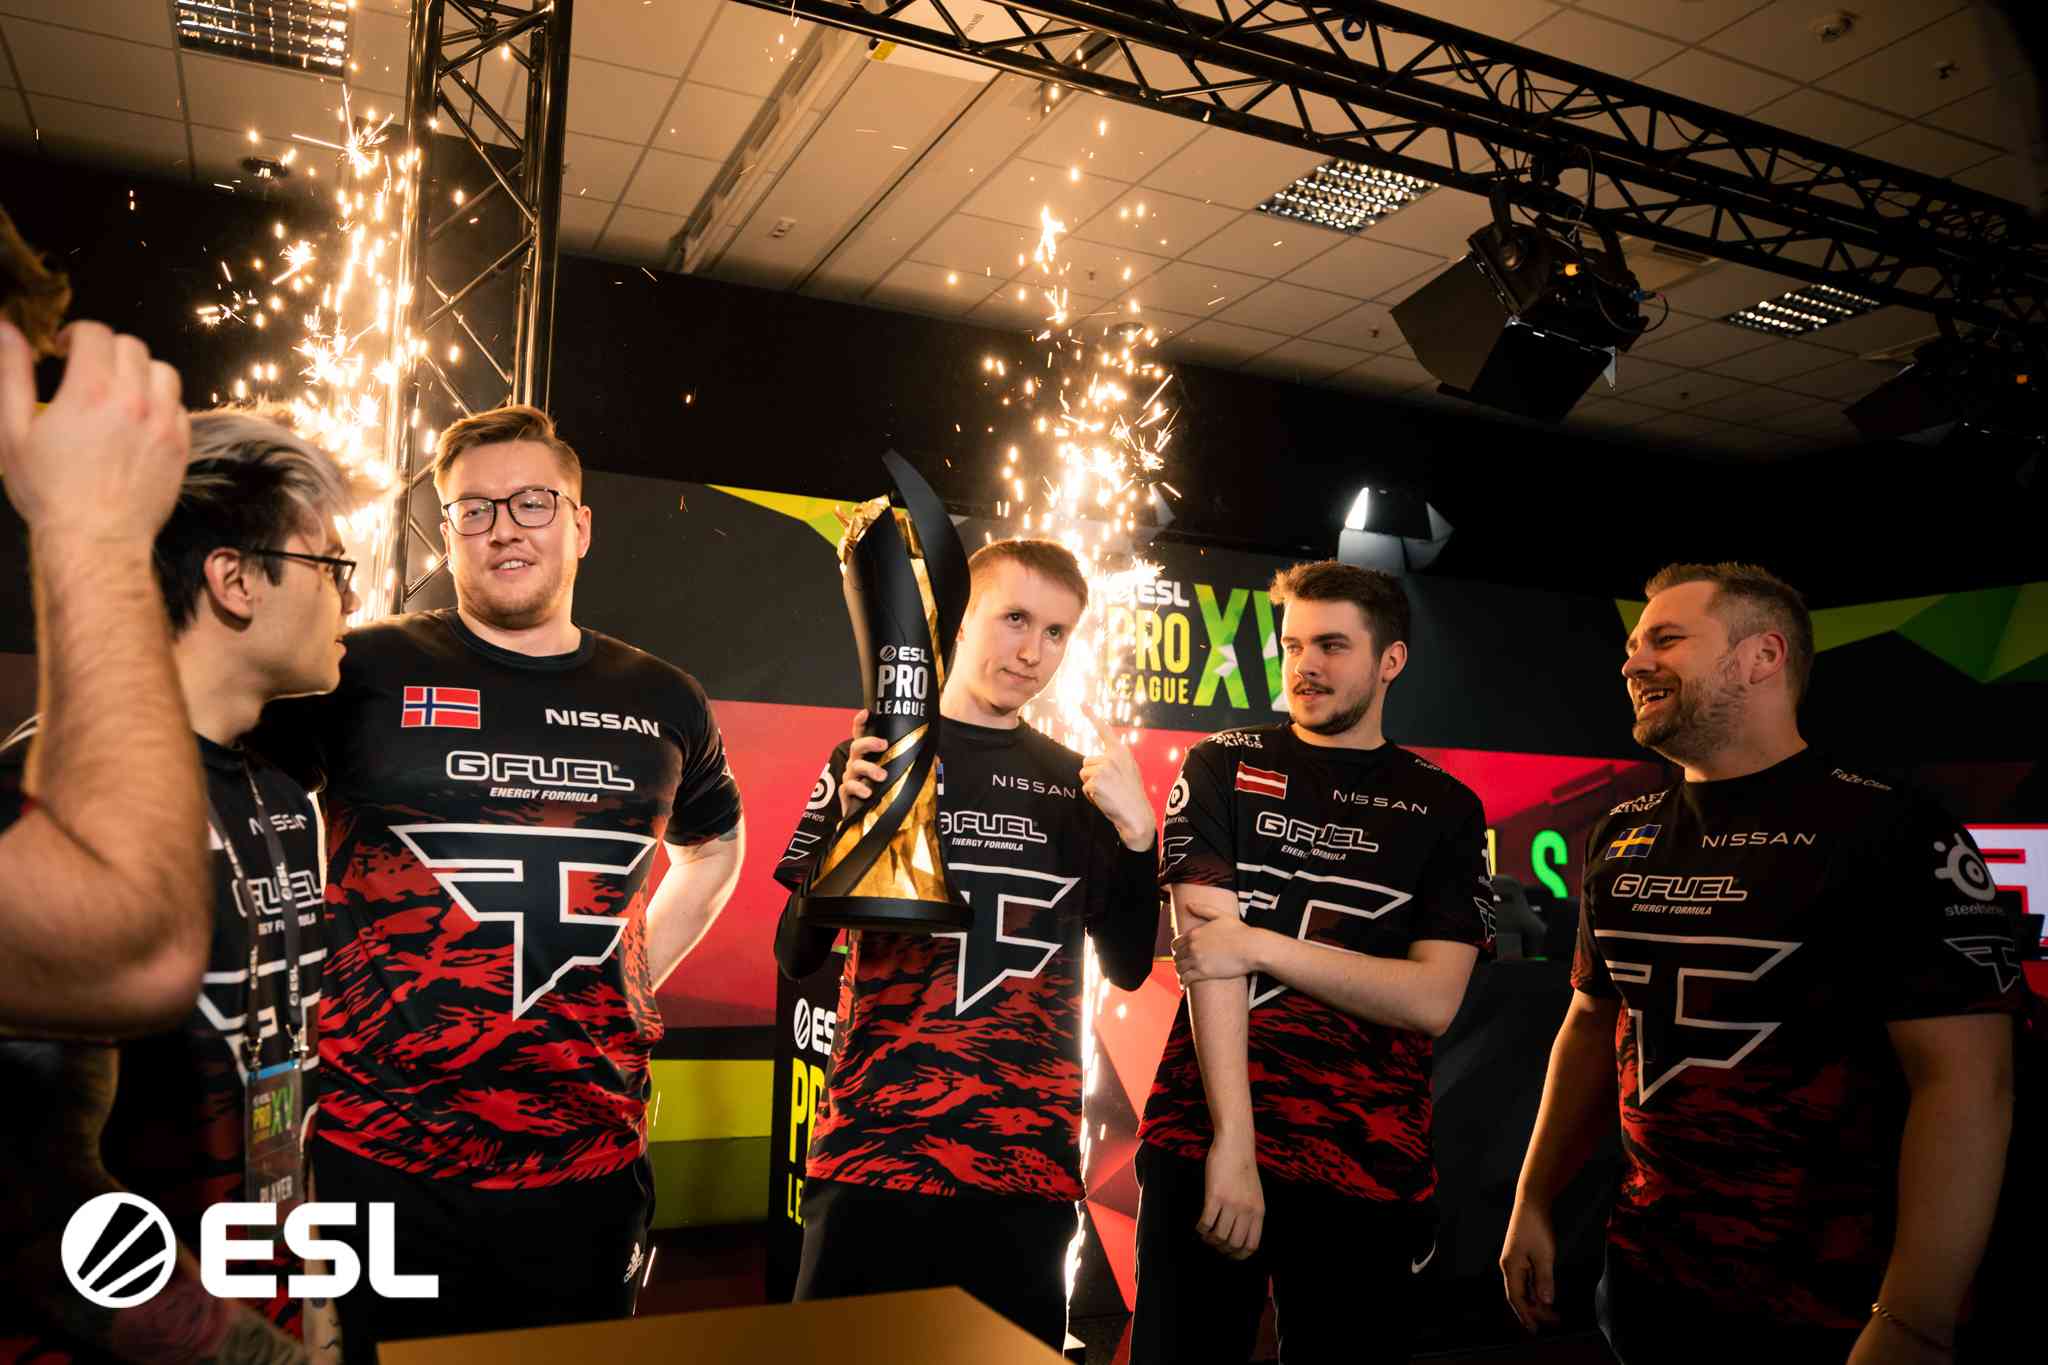 FaZe Clan hold up the trophy after winning the ESL Pro League 15